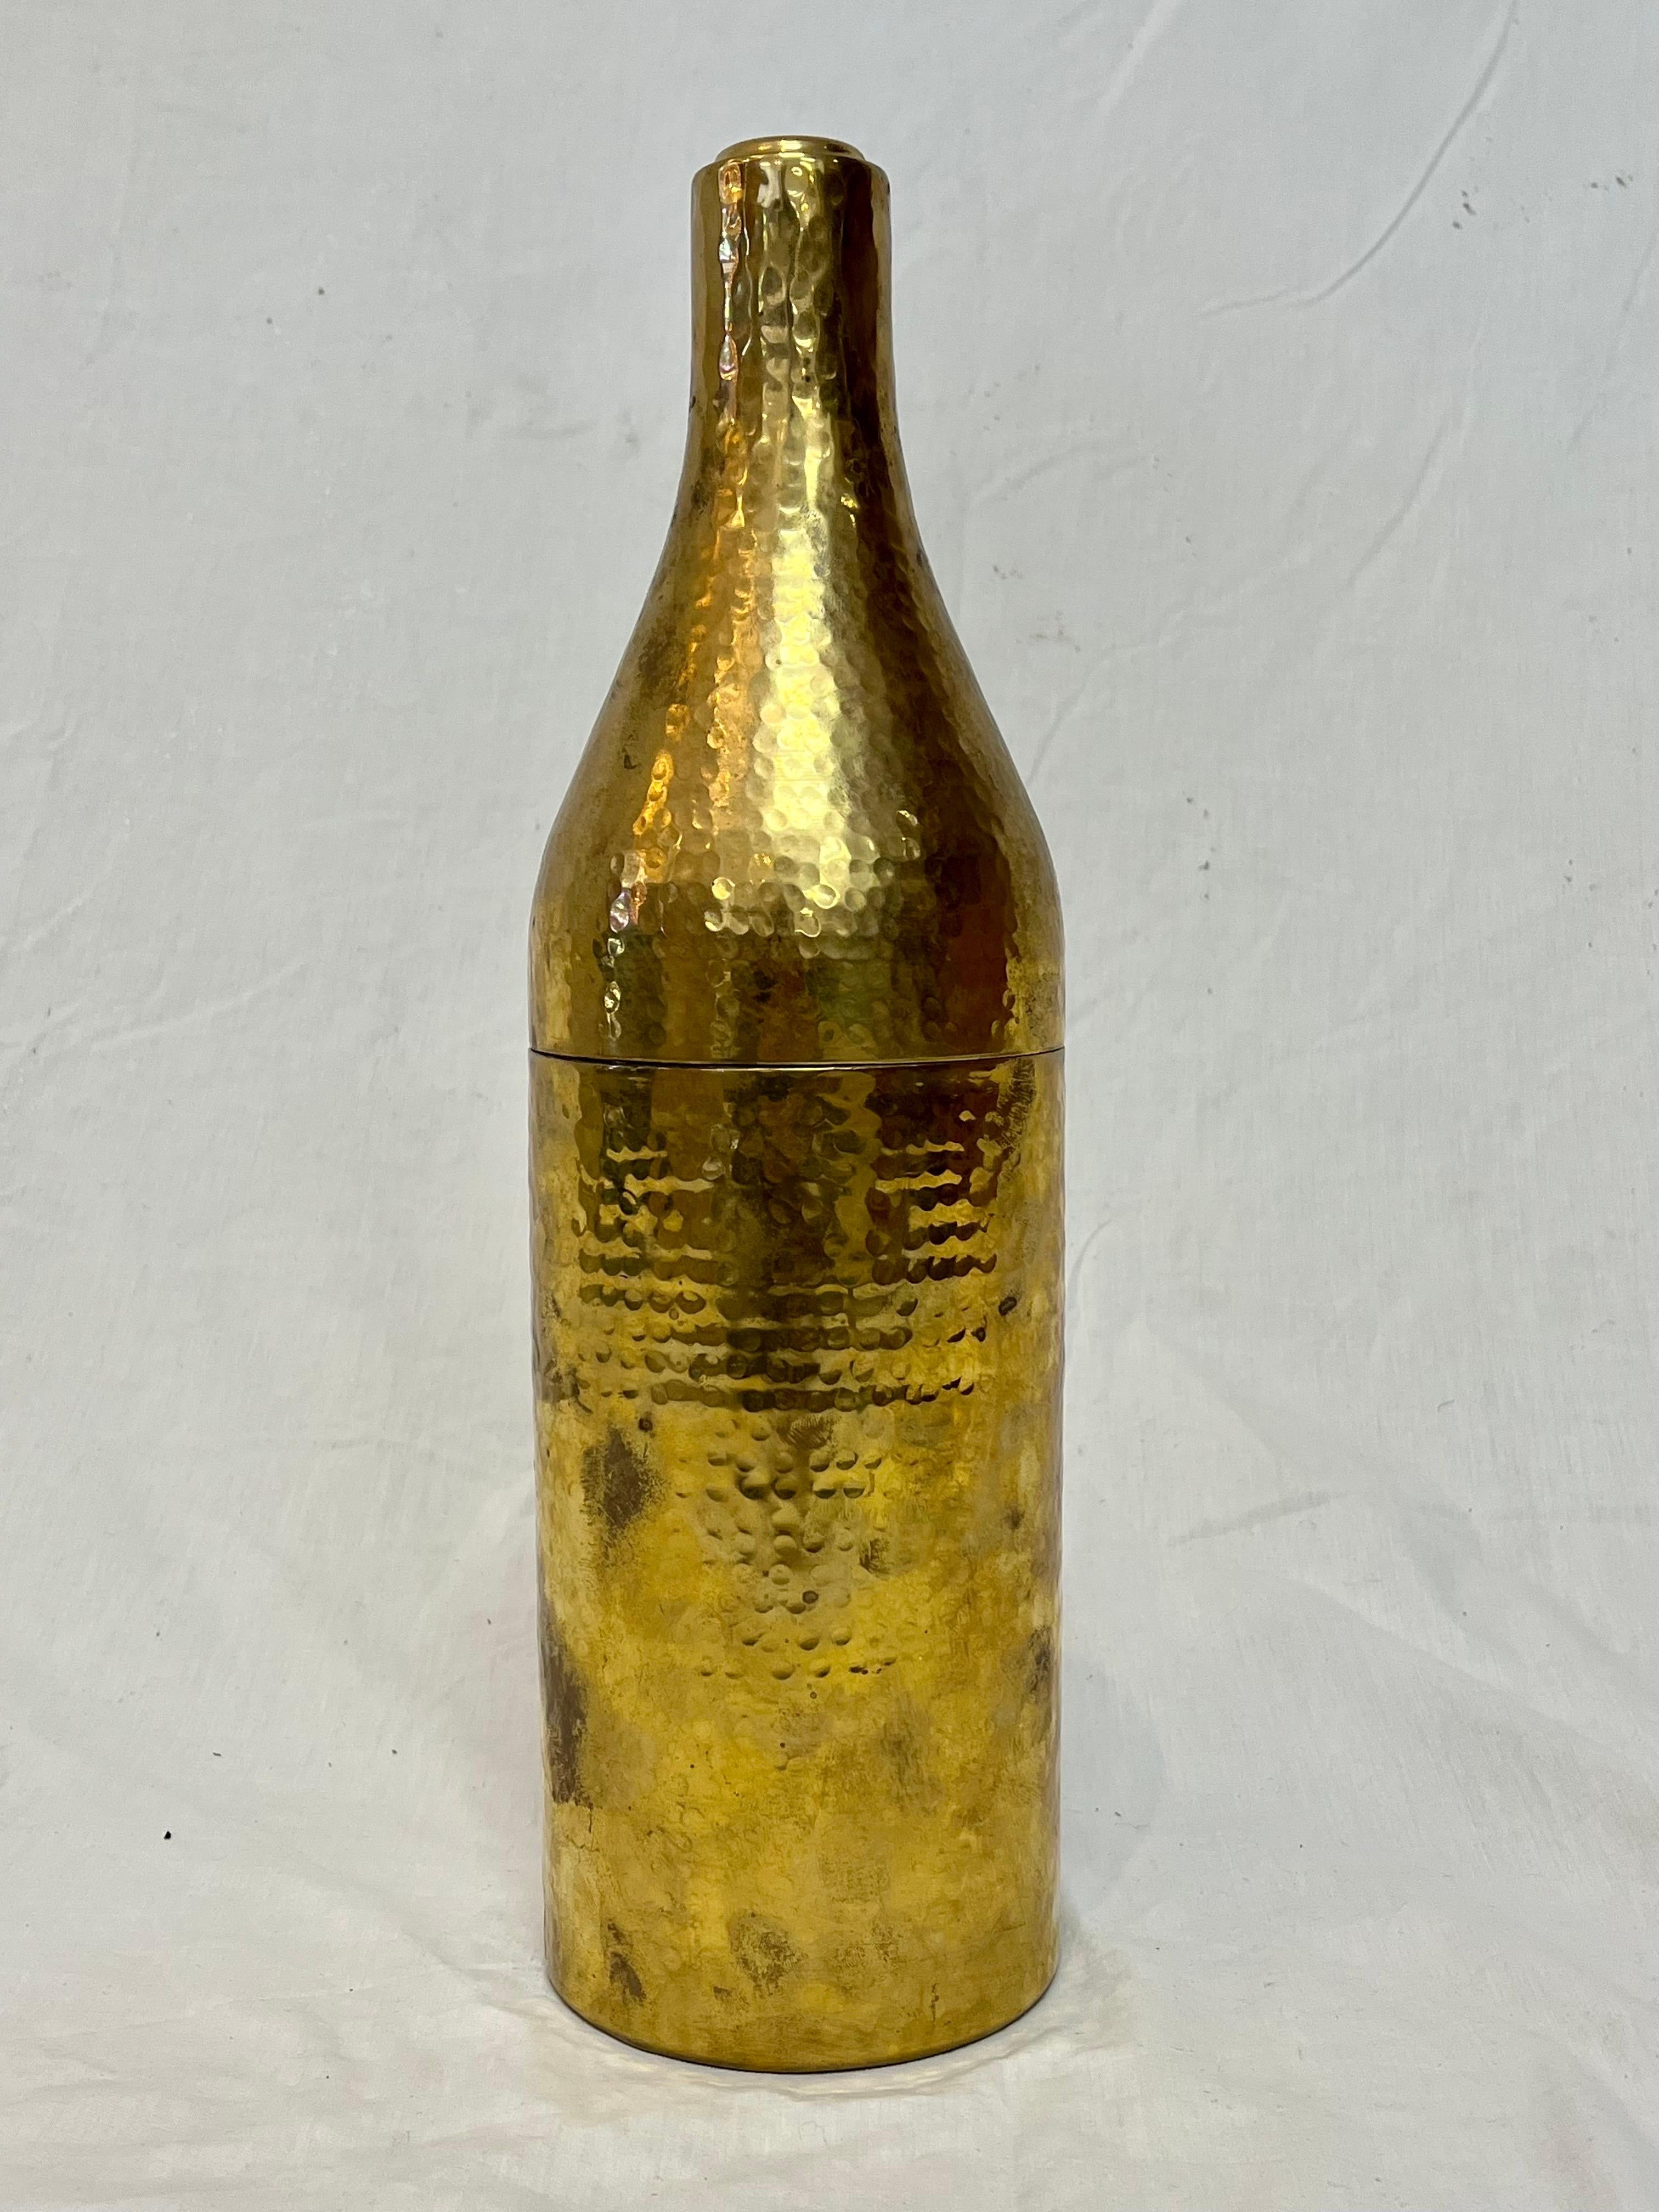 A festive and fun figural wine bottle holder by English brand Culinary Concepts. The mottled brass finish has a hand-hammered appearance lending to its appeal. The overall patina shows areas of wear and use. The top of the bottle is removable and